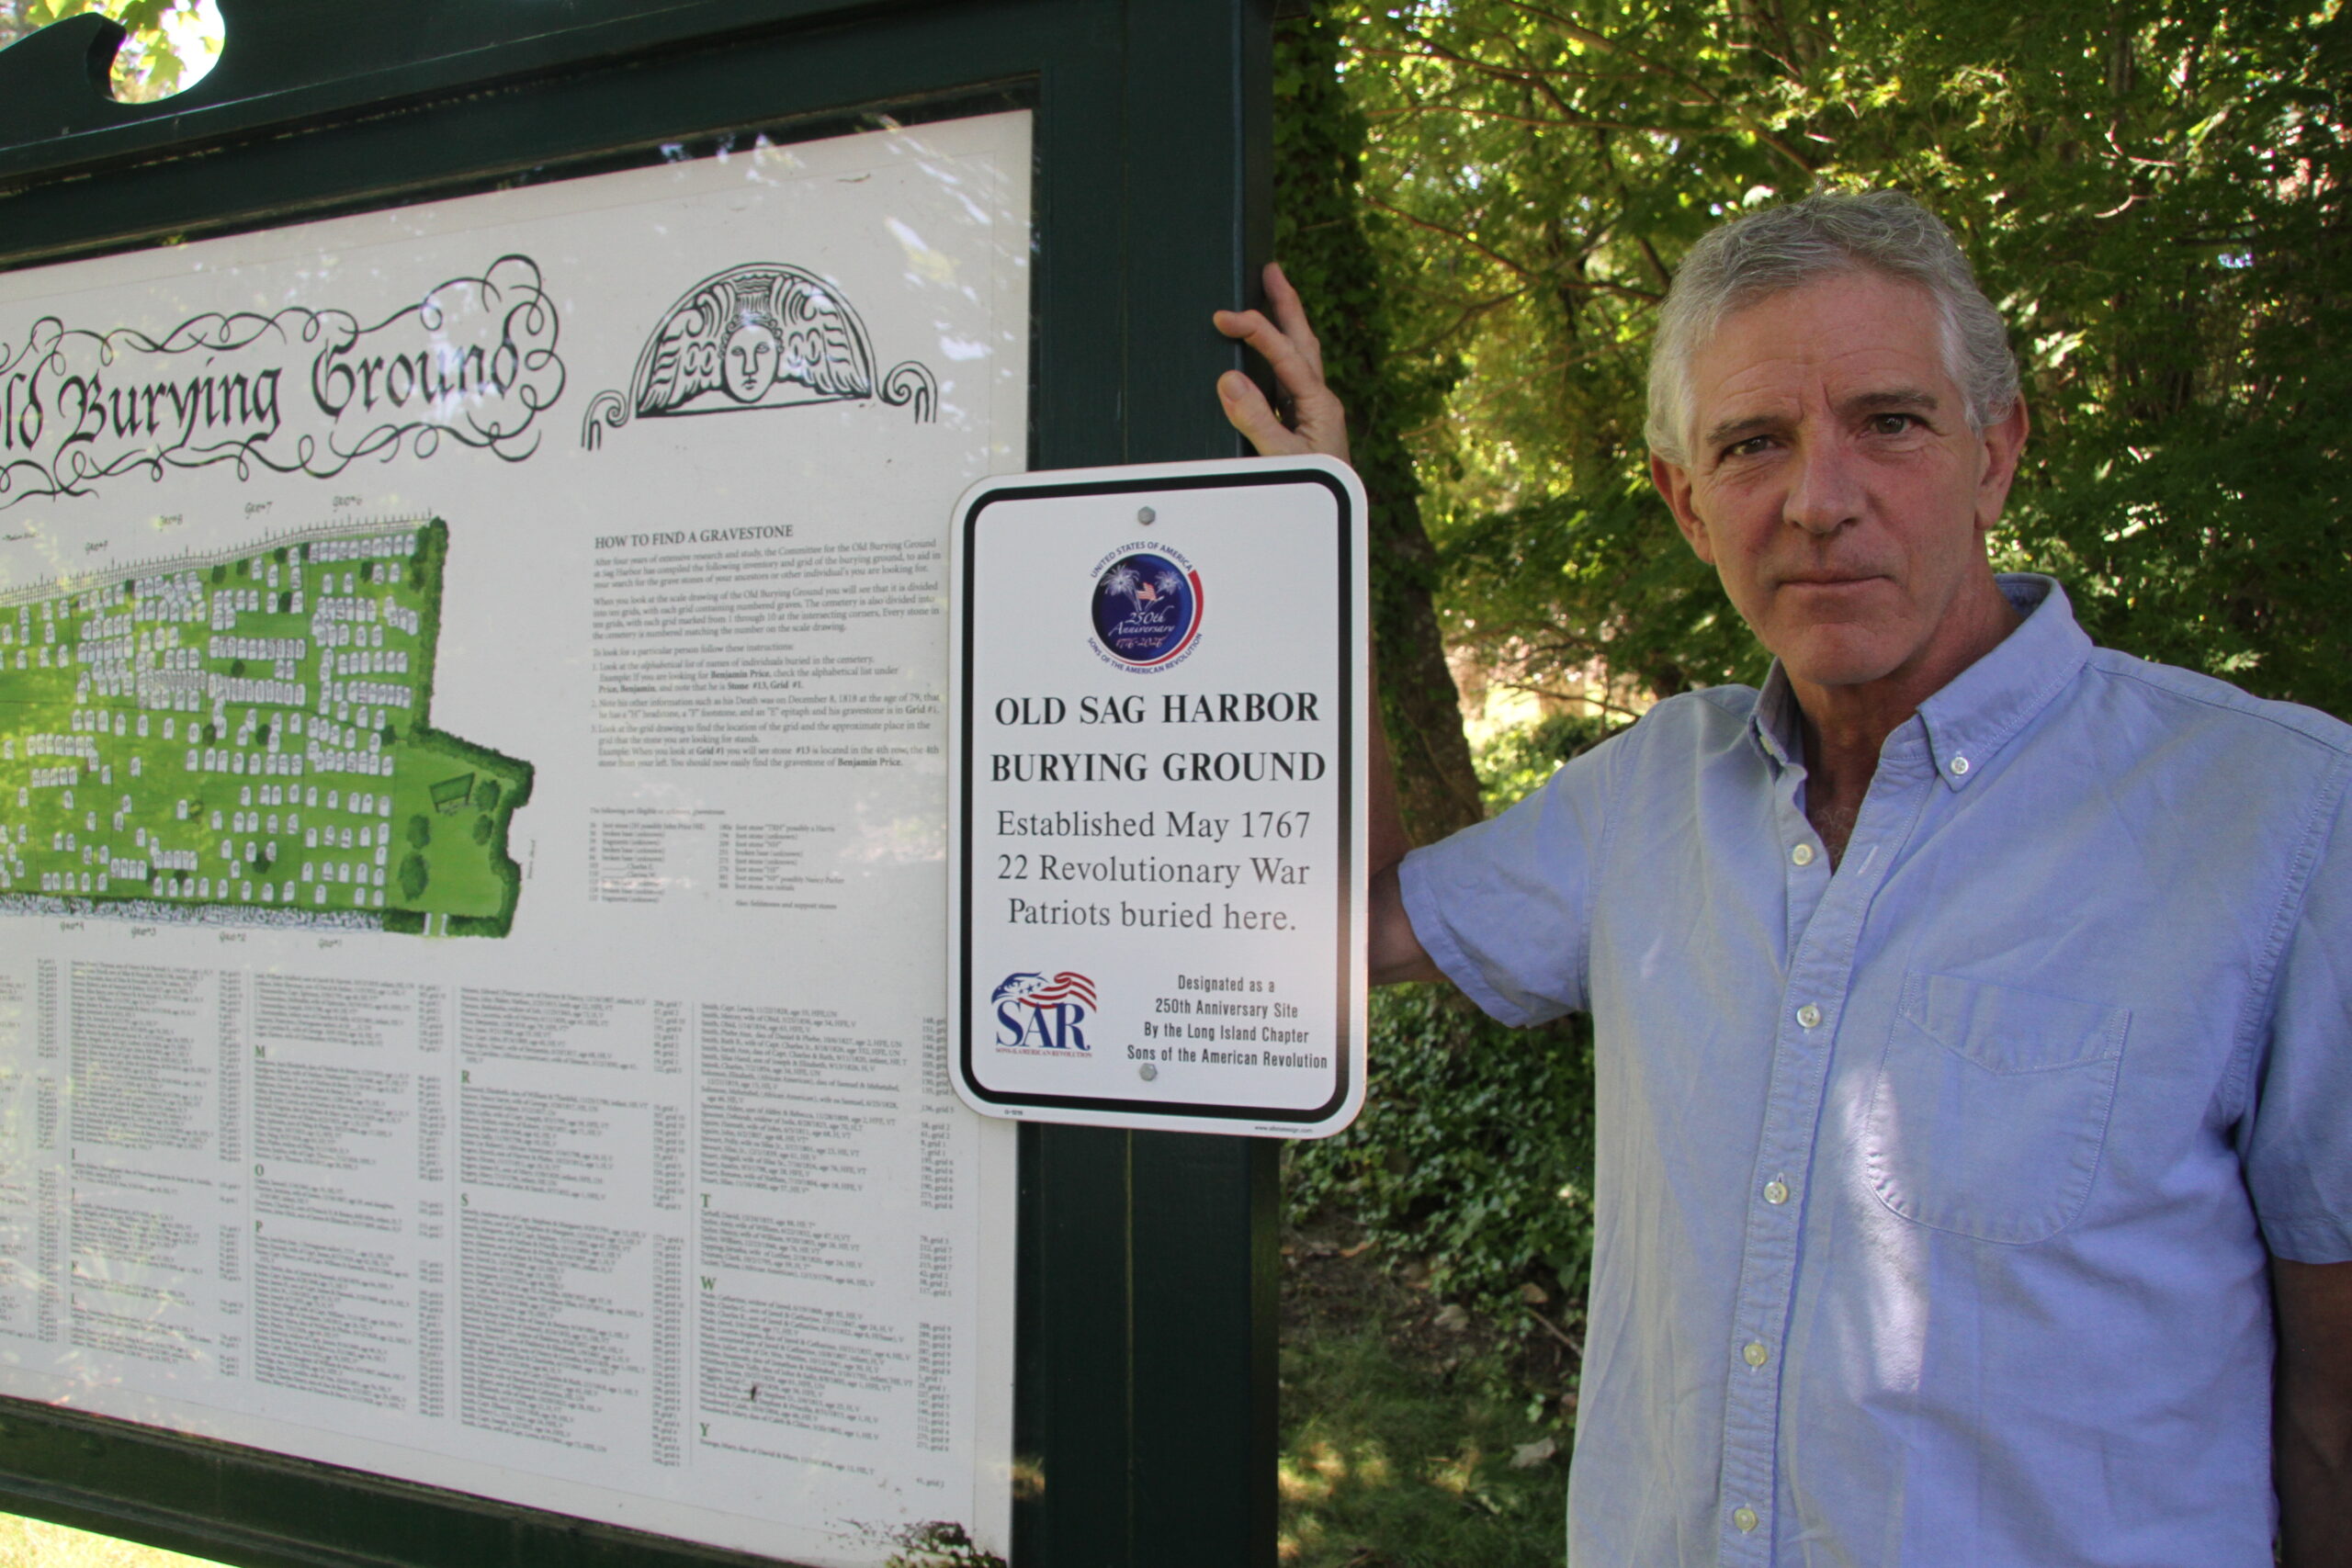 Kurt Kahofer, a North Sea resident and descendent of one of the patriots who fought at the Battle of Lexington, is a member of the Sons of the American Revolution, which is posting signs alerting visitors to the presence of the graves of patriots at cemeteries and burying grounds throughout Long Island.